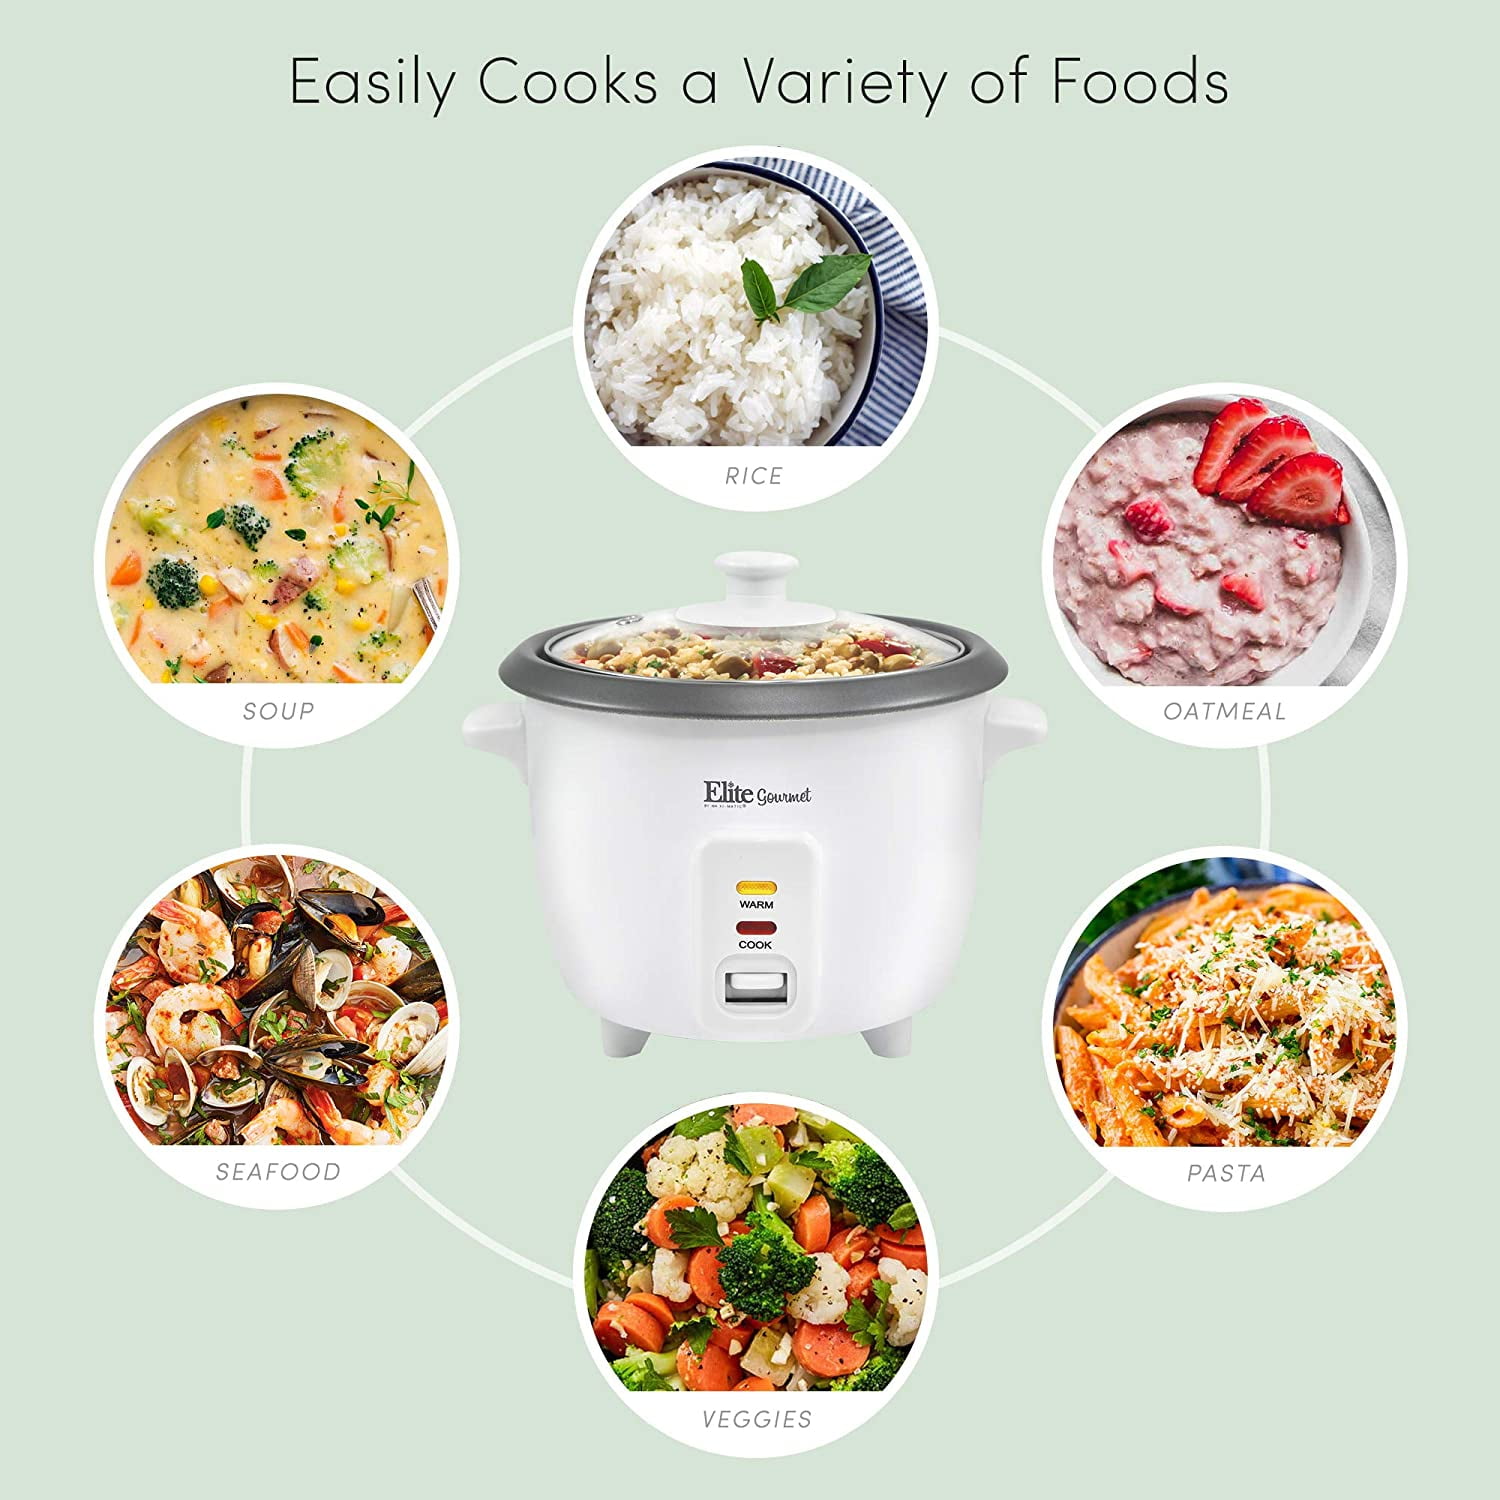 Elite Gourmet Maxi-Matic Electric Rice Cooker with Stainless Steel Inner Pot  Makes Soups, Stews, Porridge's, Grains and Cereals, 10 cups cooked (5 Cups  uncooked), Black 